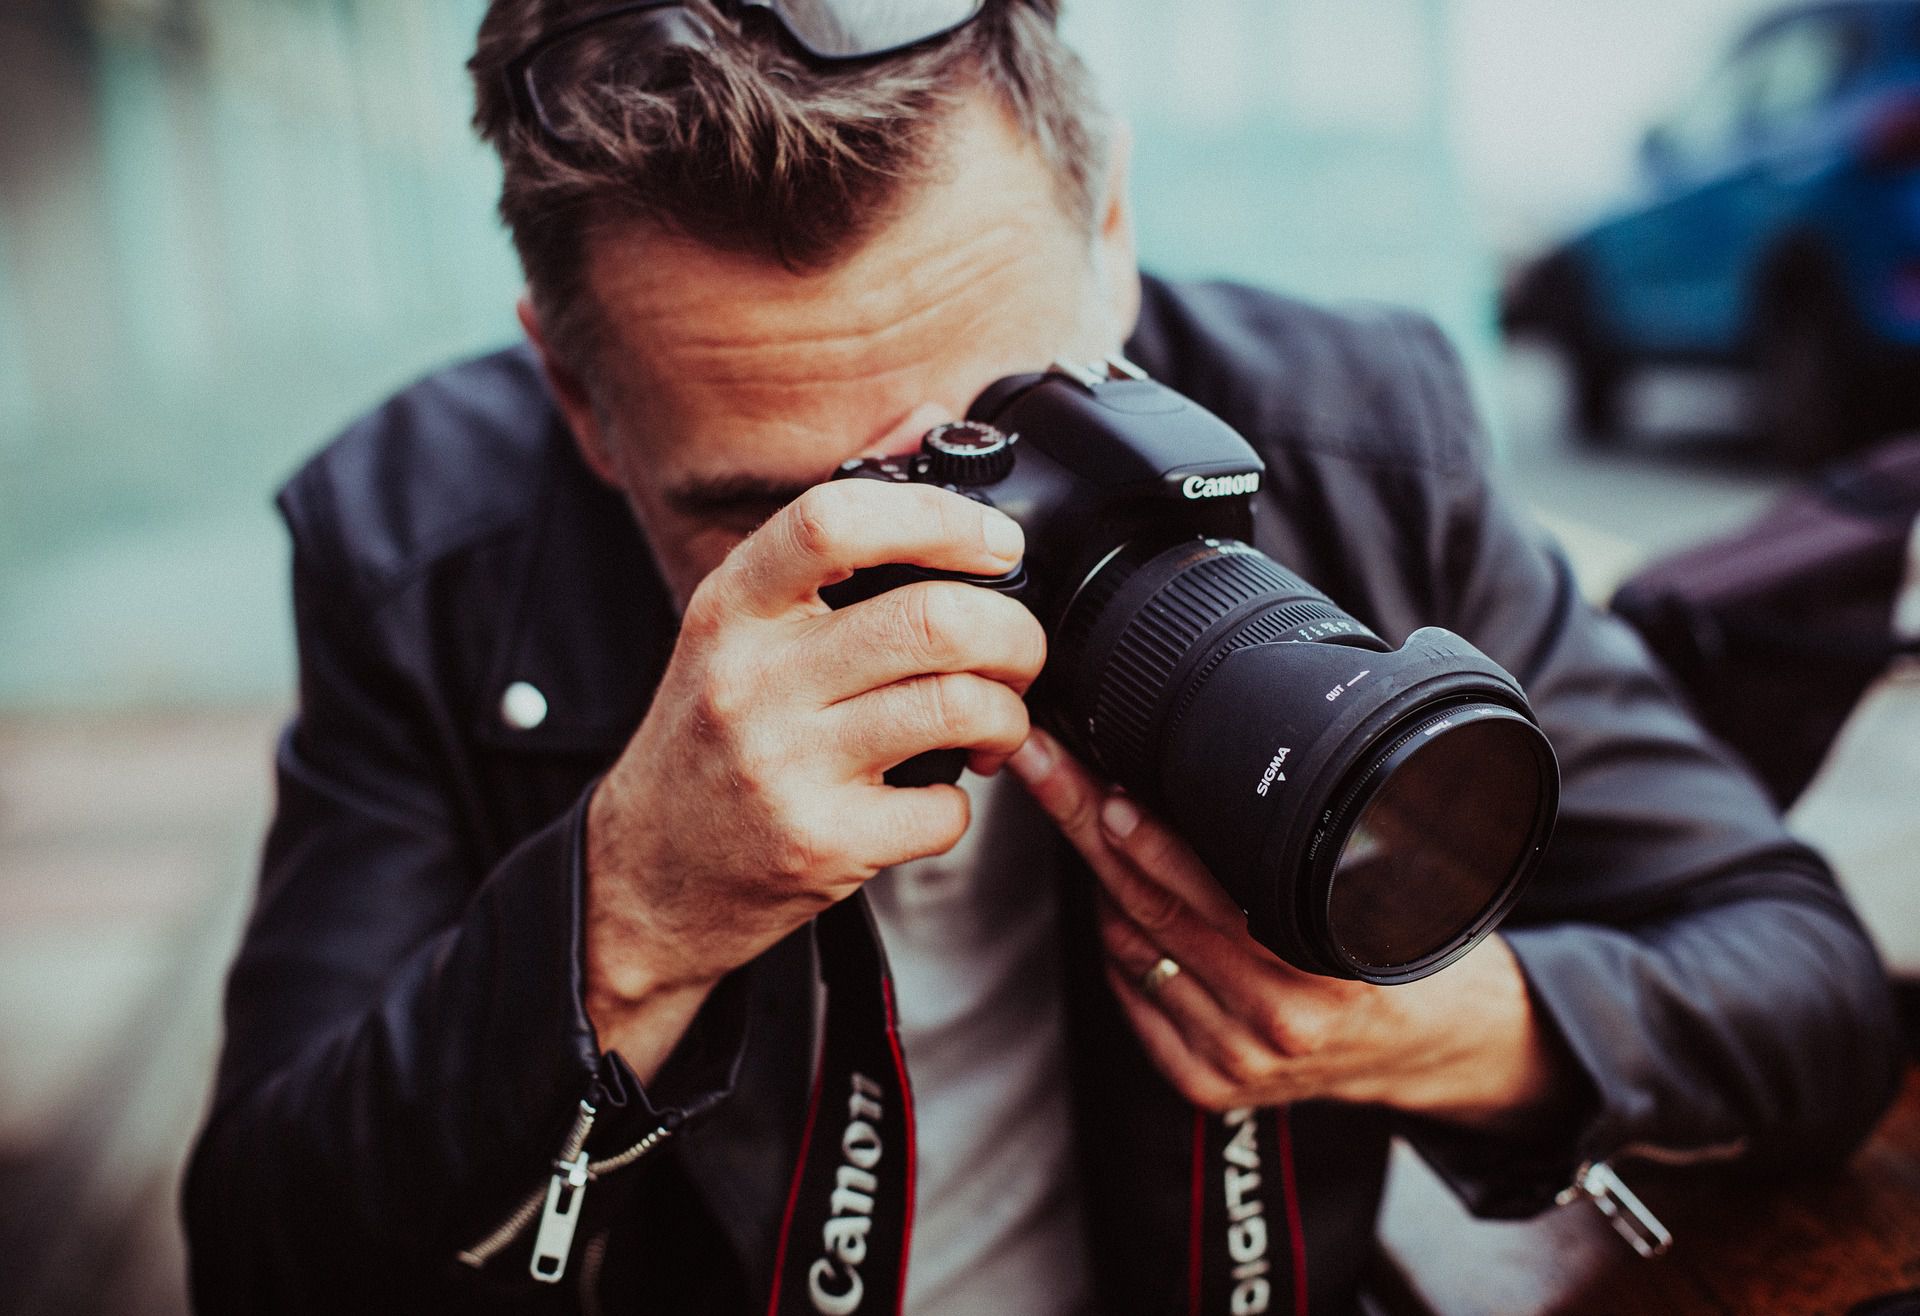 online photography jobs in canada